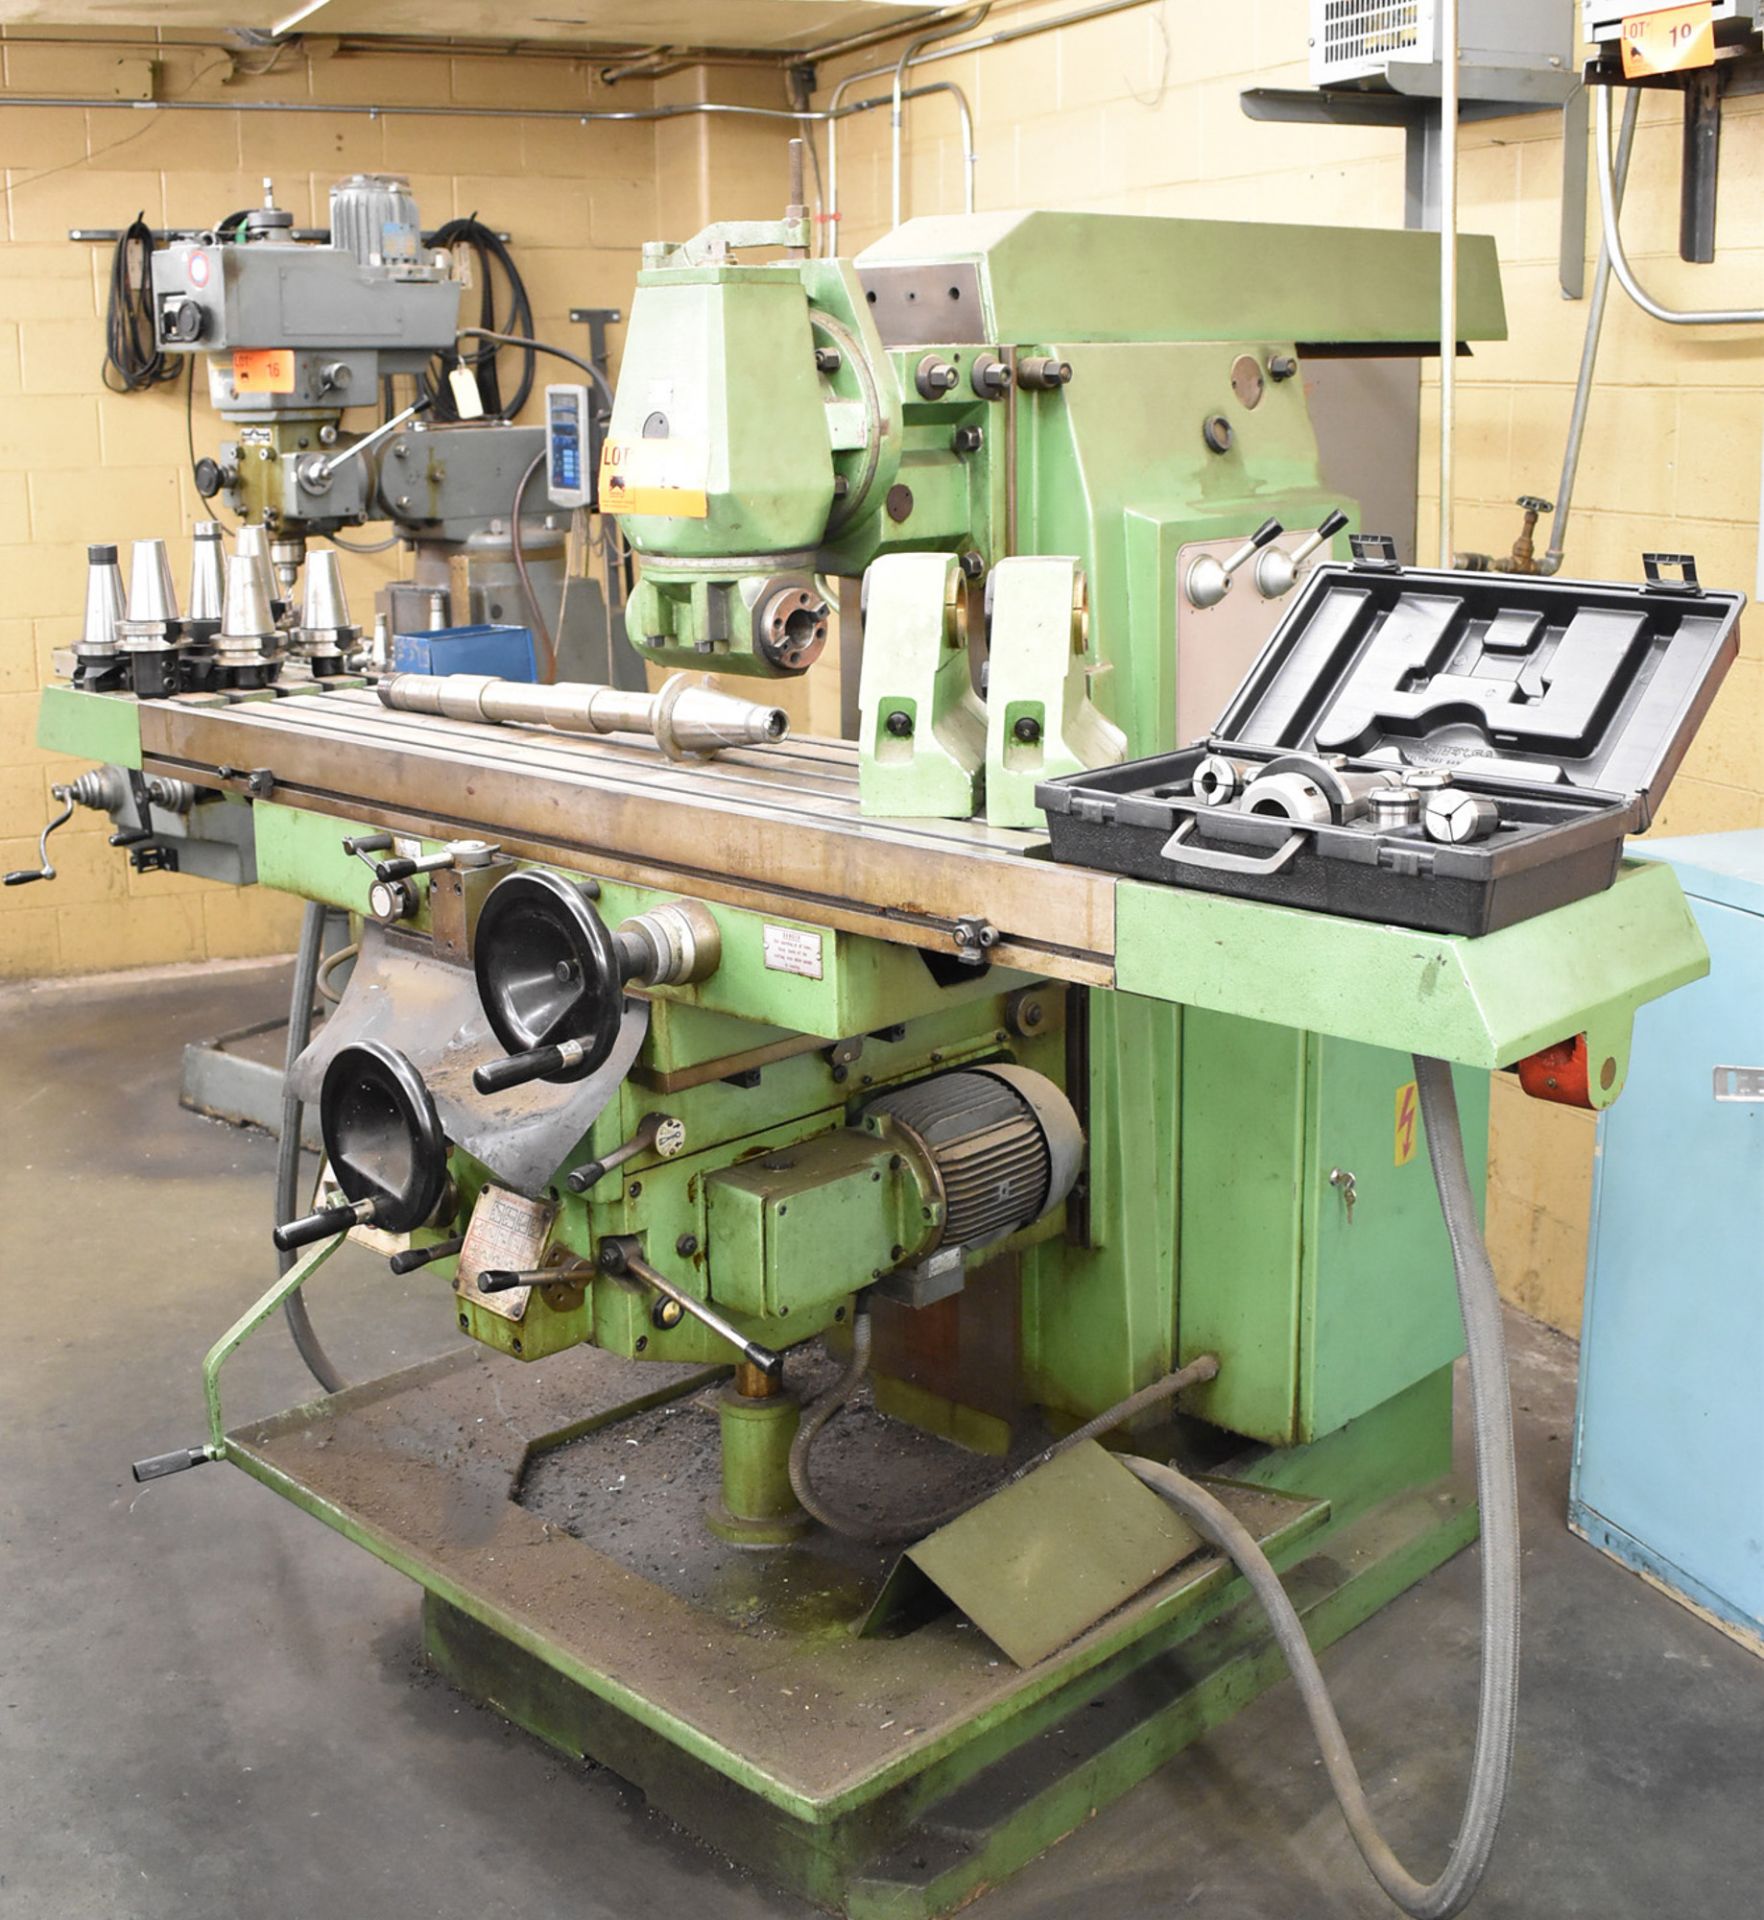 FEXAC UG UNIVERSAL MILLING MACHINE WITH 13.75"X63" TABLE, SPEEDS TO 1600 RPM, PUSH BUTTON CONTROL,